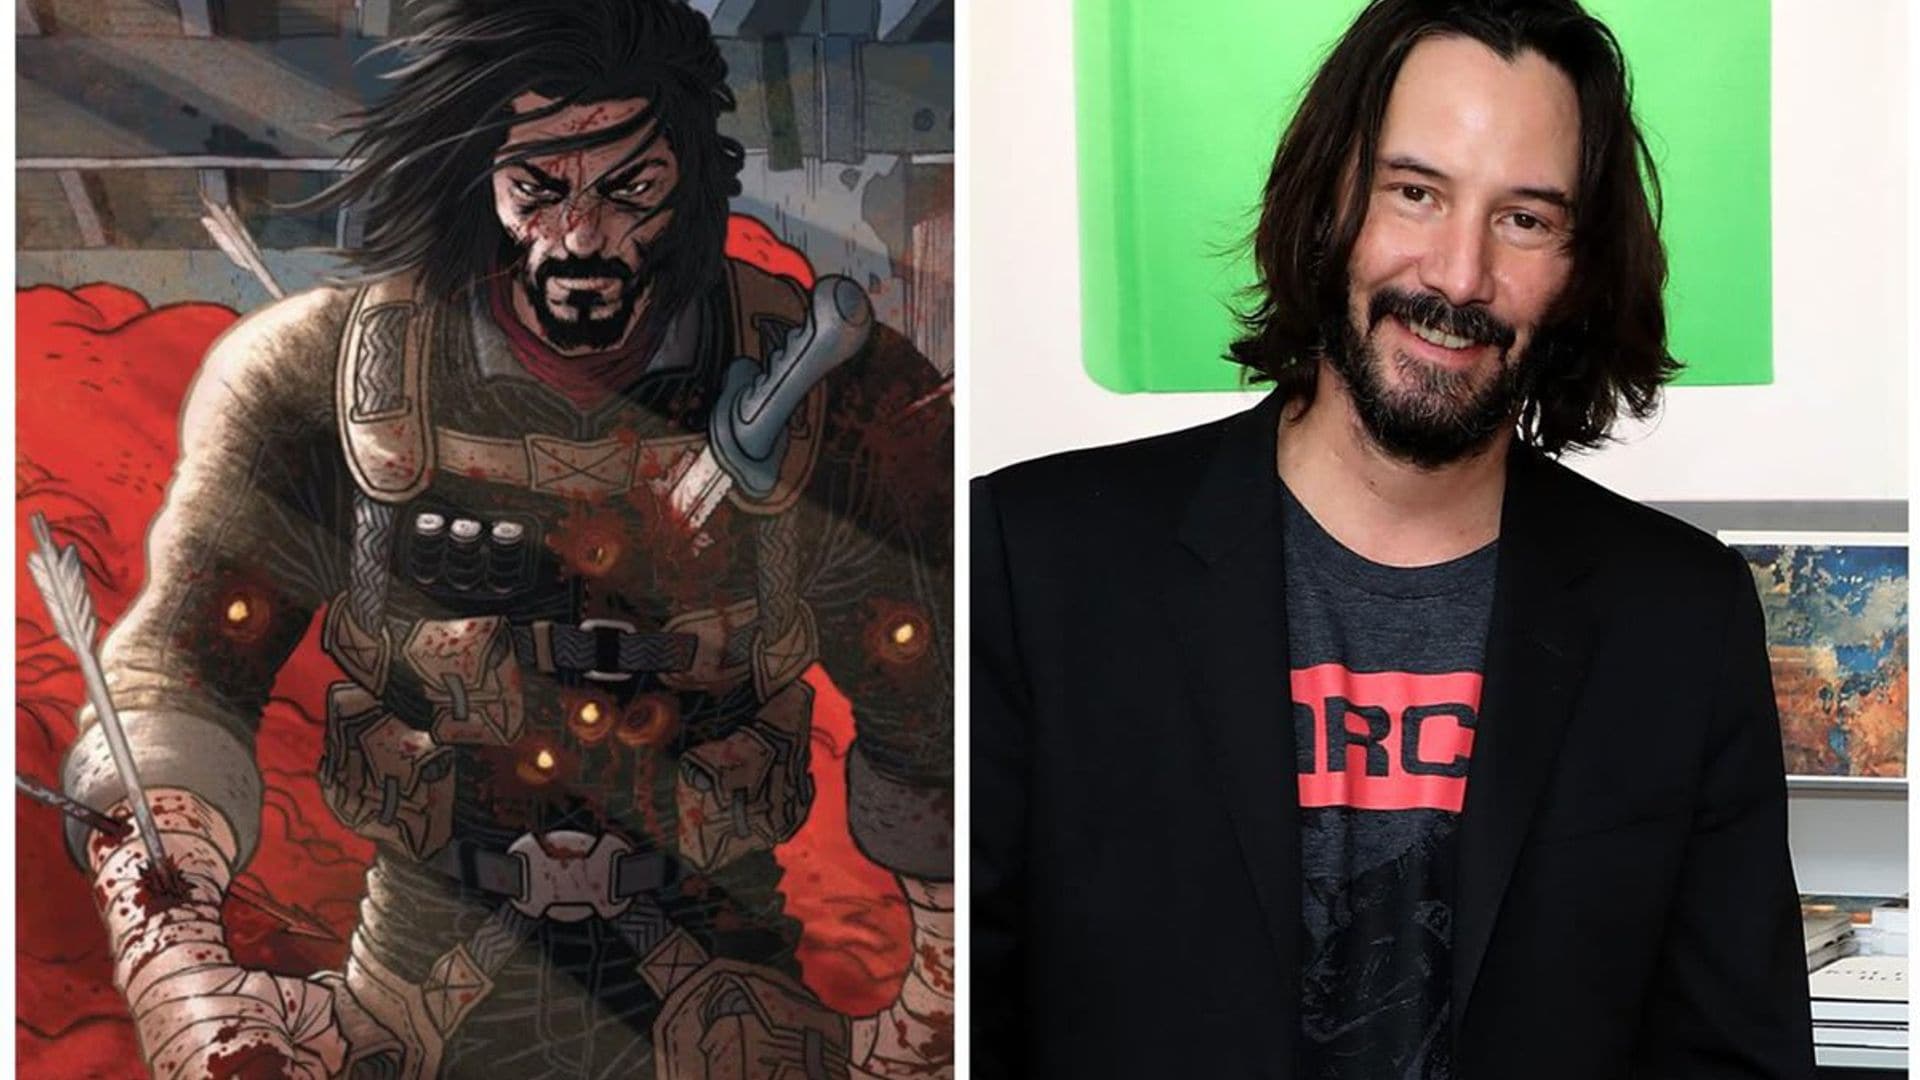 Keanu Reeves is starring in a new major franchise based on his comic books